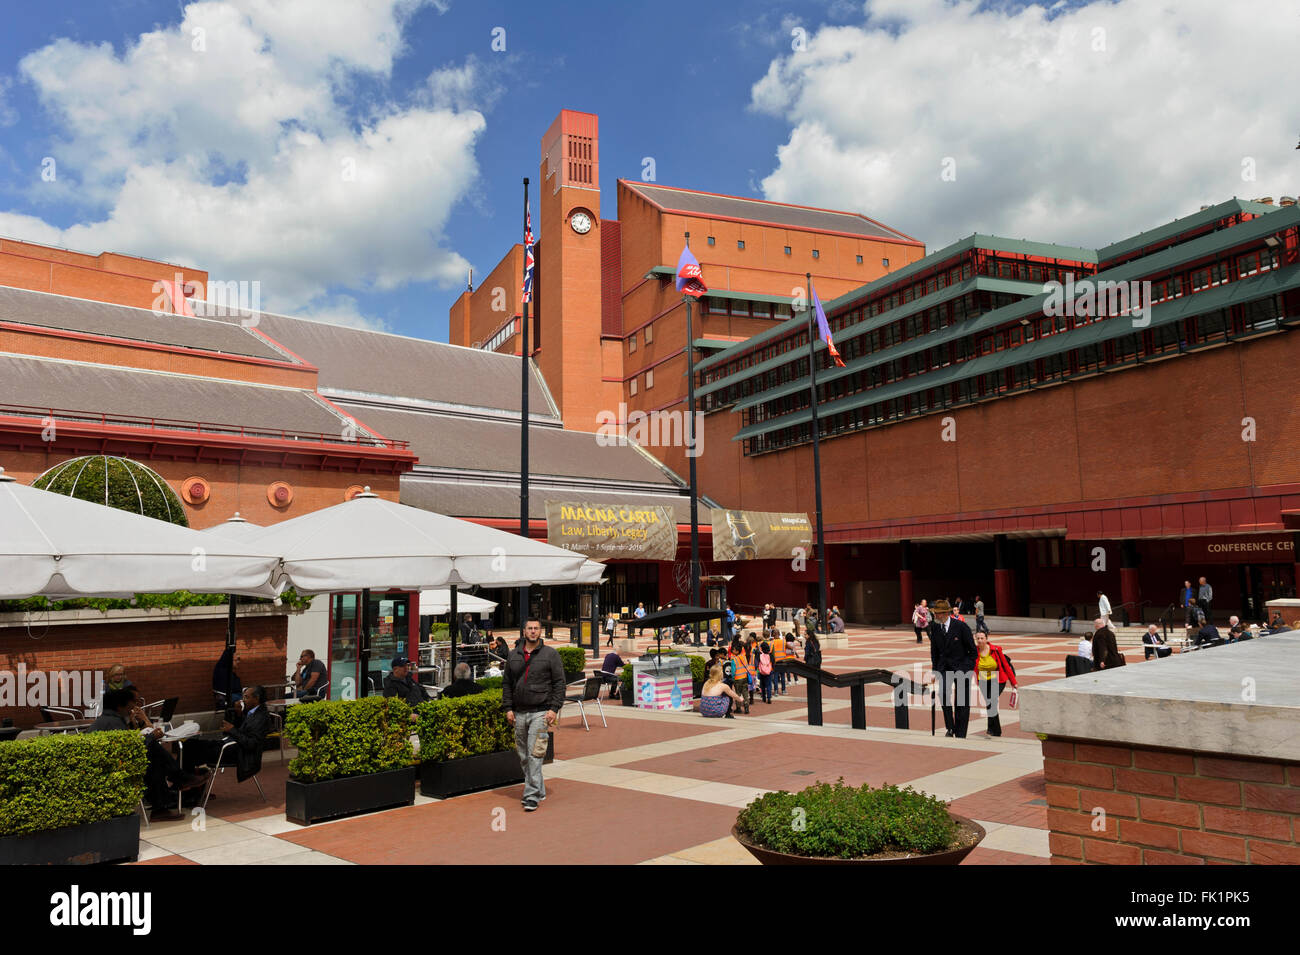 The exterior of the British Library building in London, United Kingdom. Stock Photo